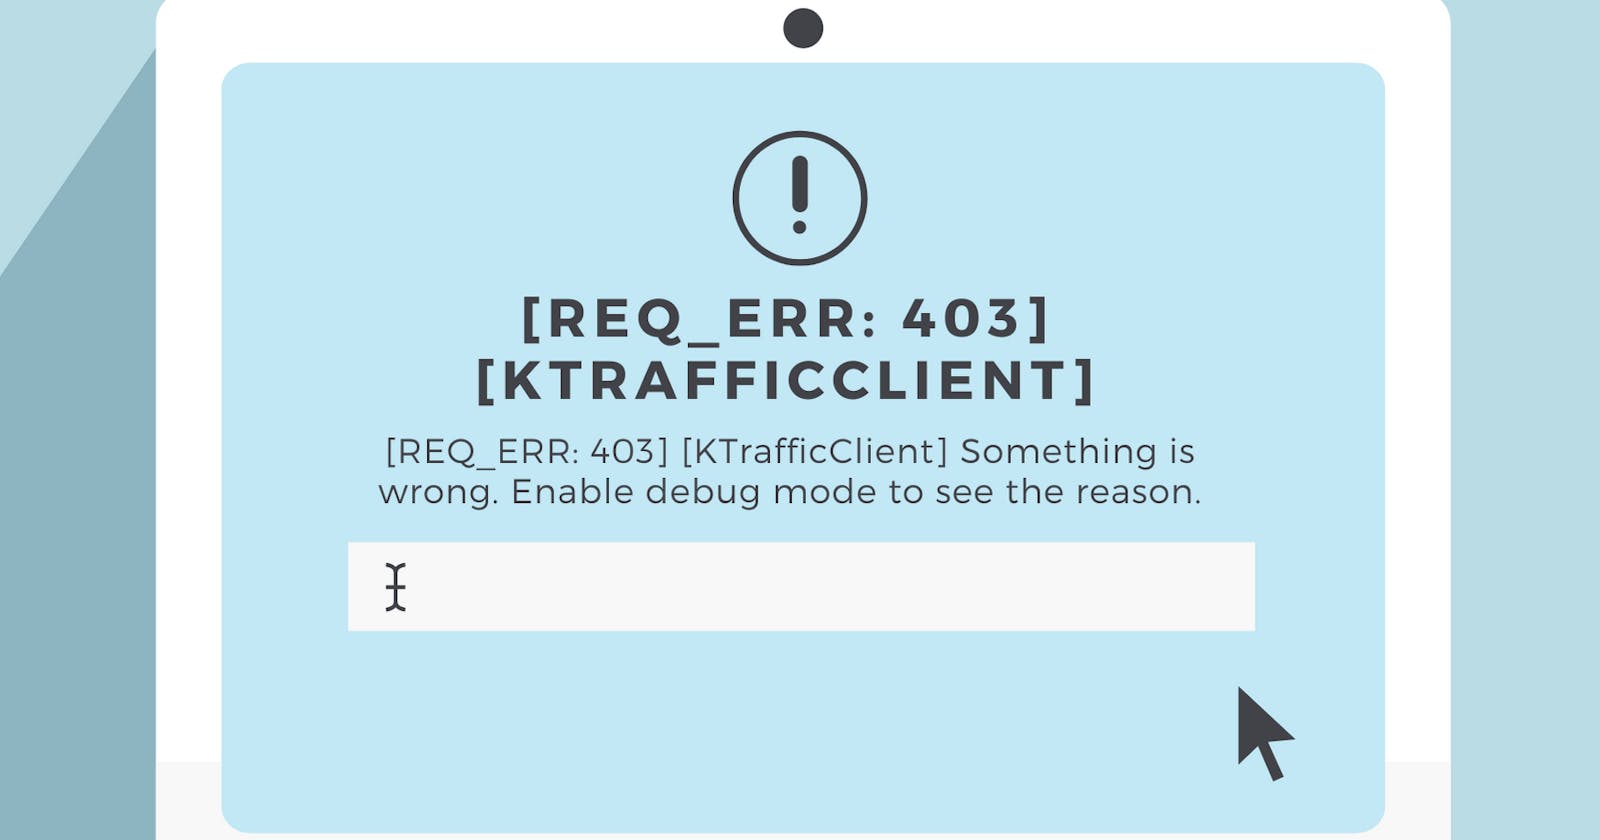 [REQ_ERR: 403] [KTrafficClient] Something is wrong. Enable debug mode to see the reason.